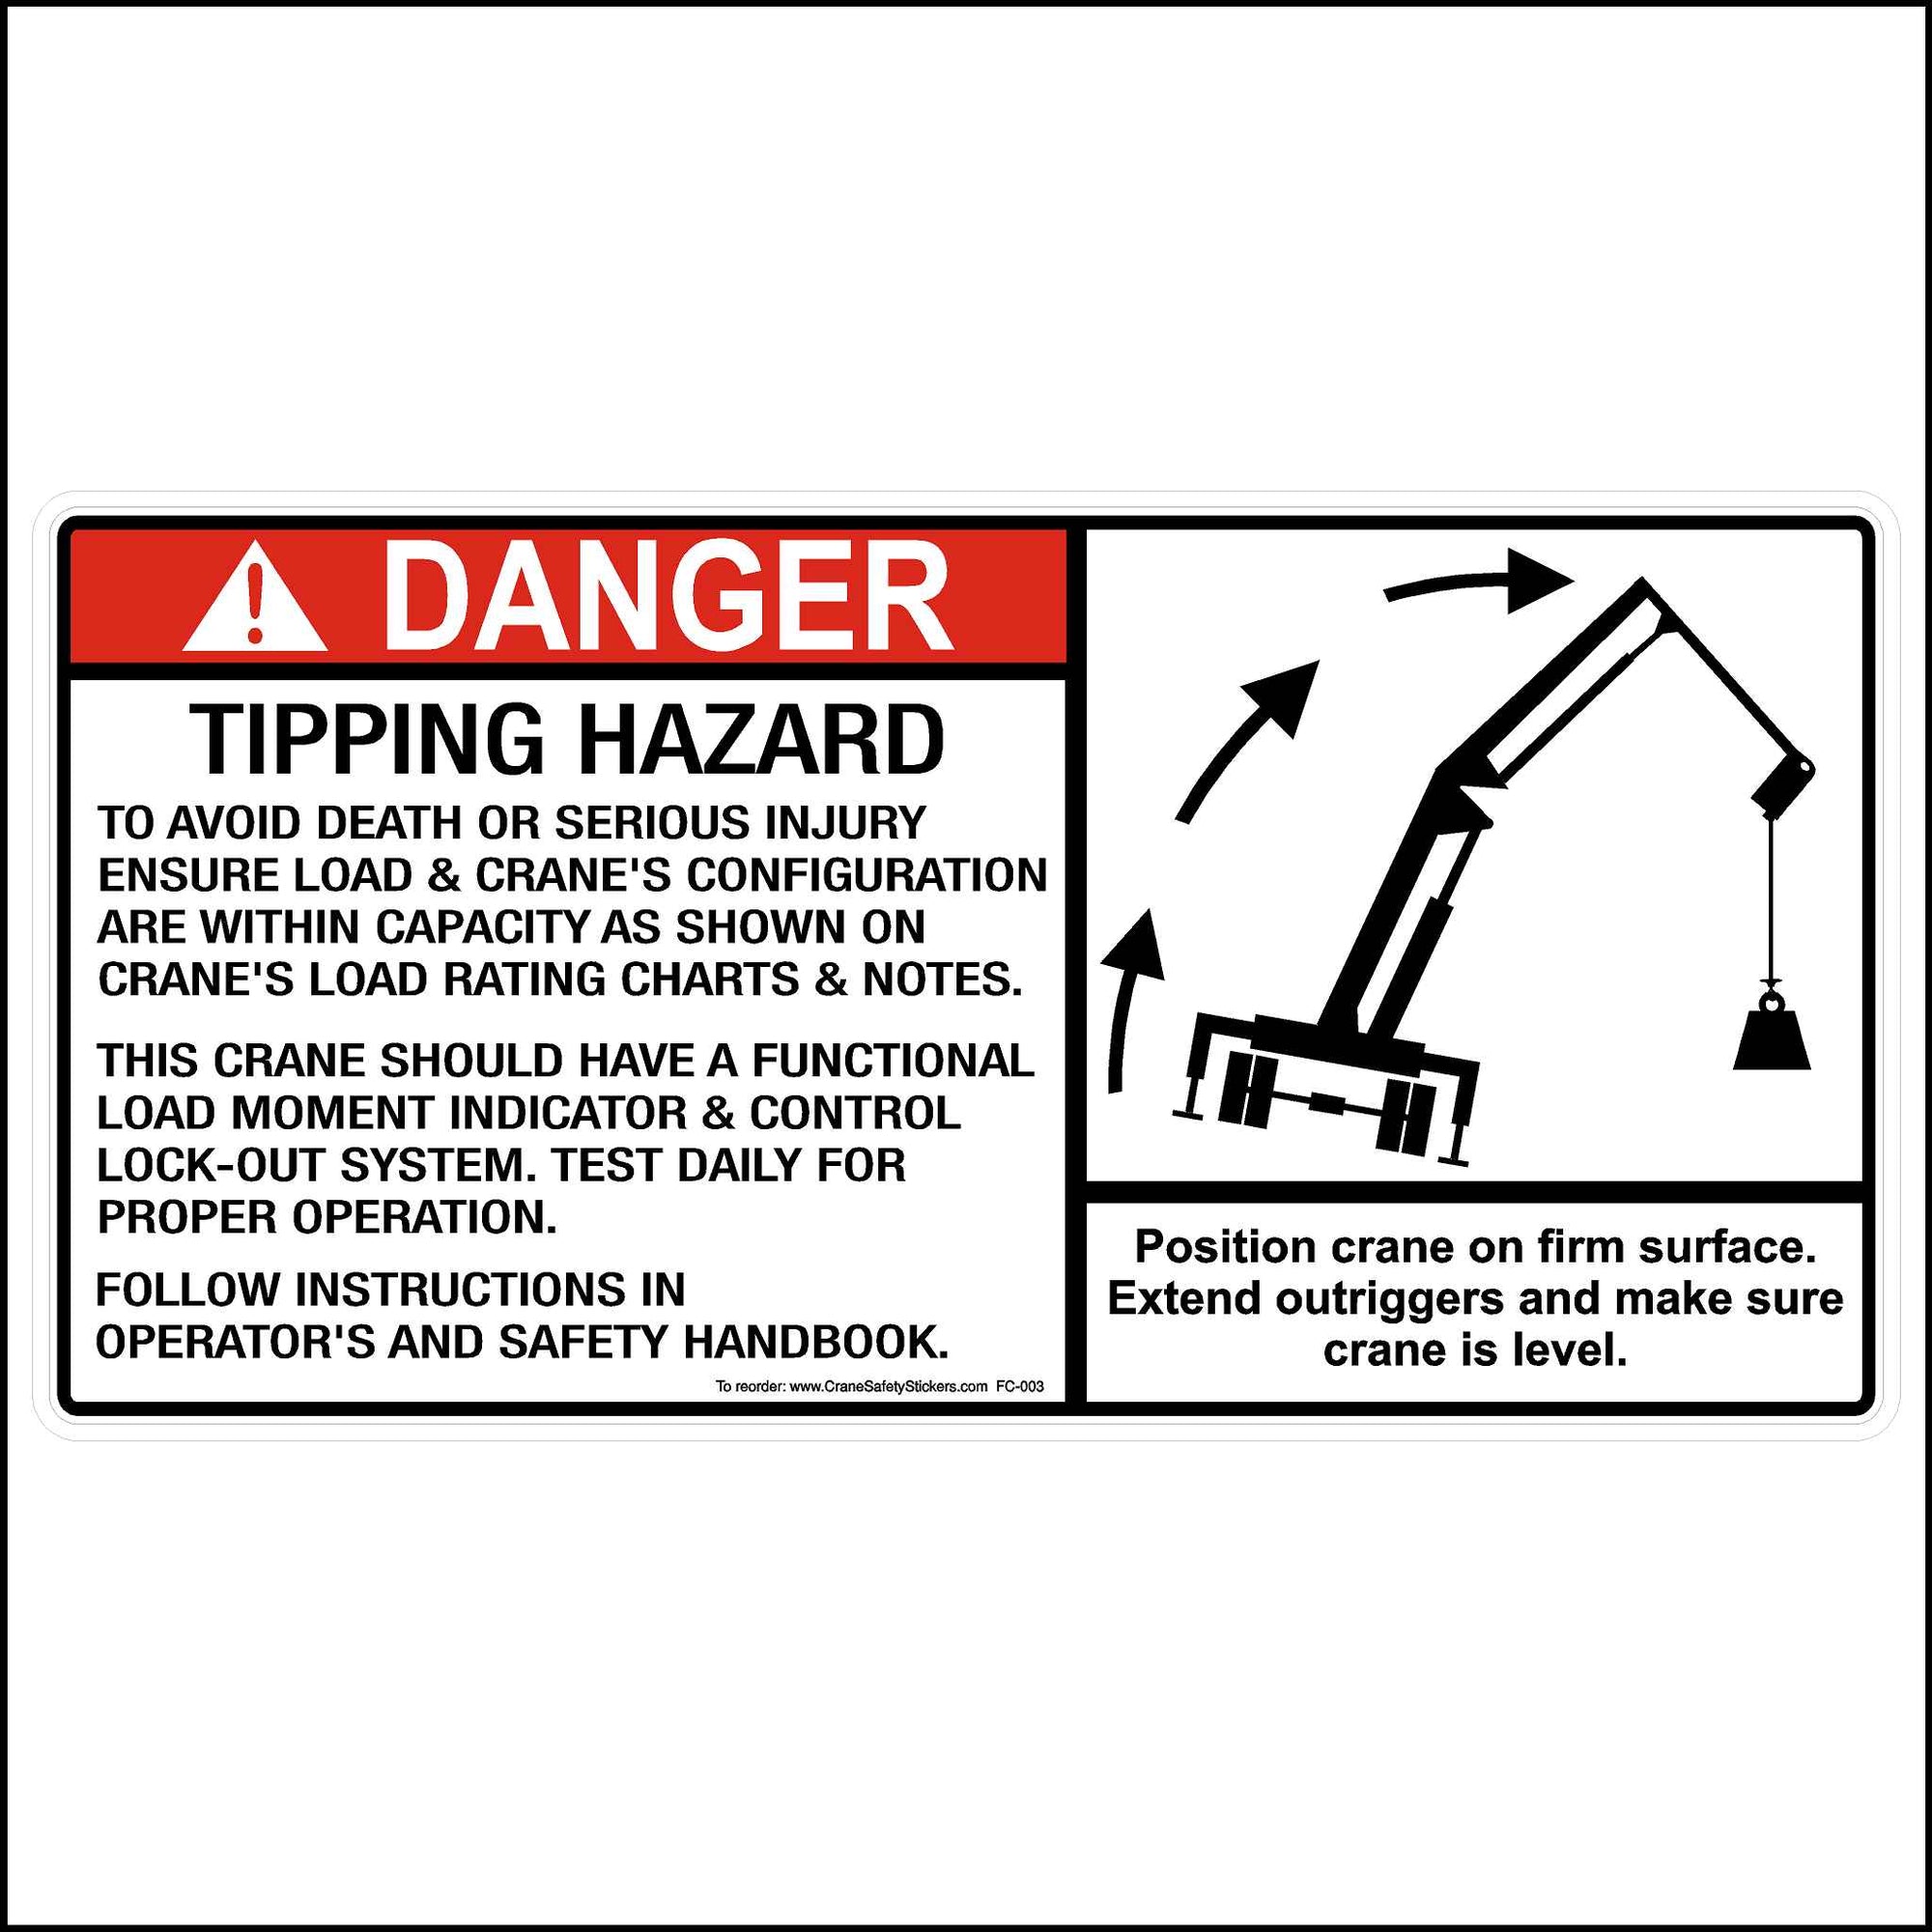 Crane Safety sticker Printed with, Position crane on firm surface. Extend outriggers and make sure crane is level.